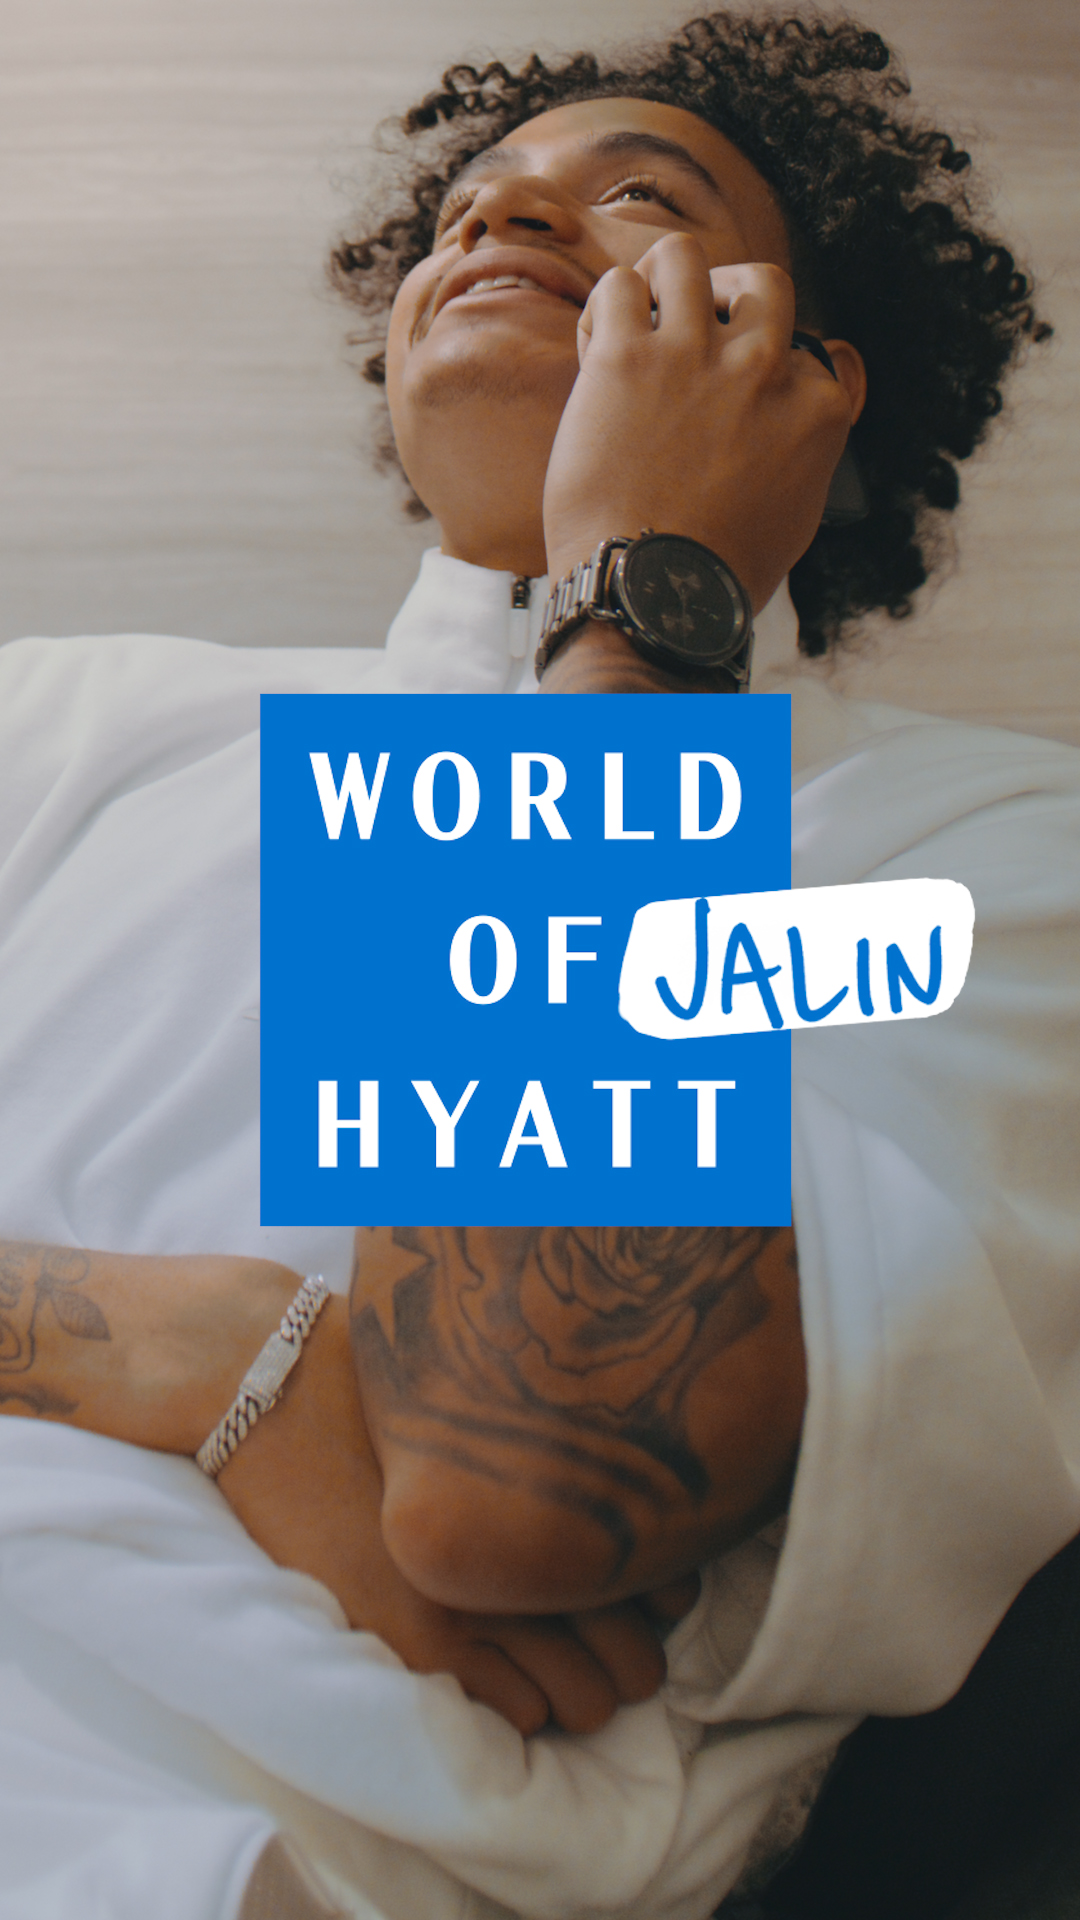 The GOJALIN15 offer celebrates Jalin’s achievements as he gears up for the big league and is welcomed back into the World of Hyatt family.